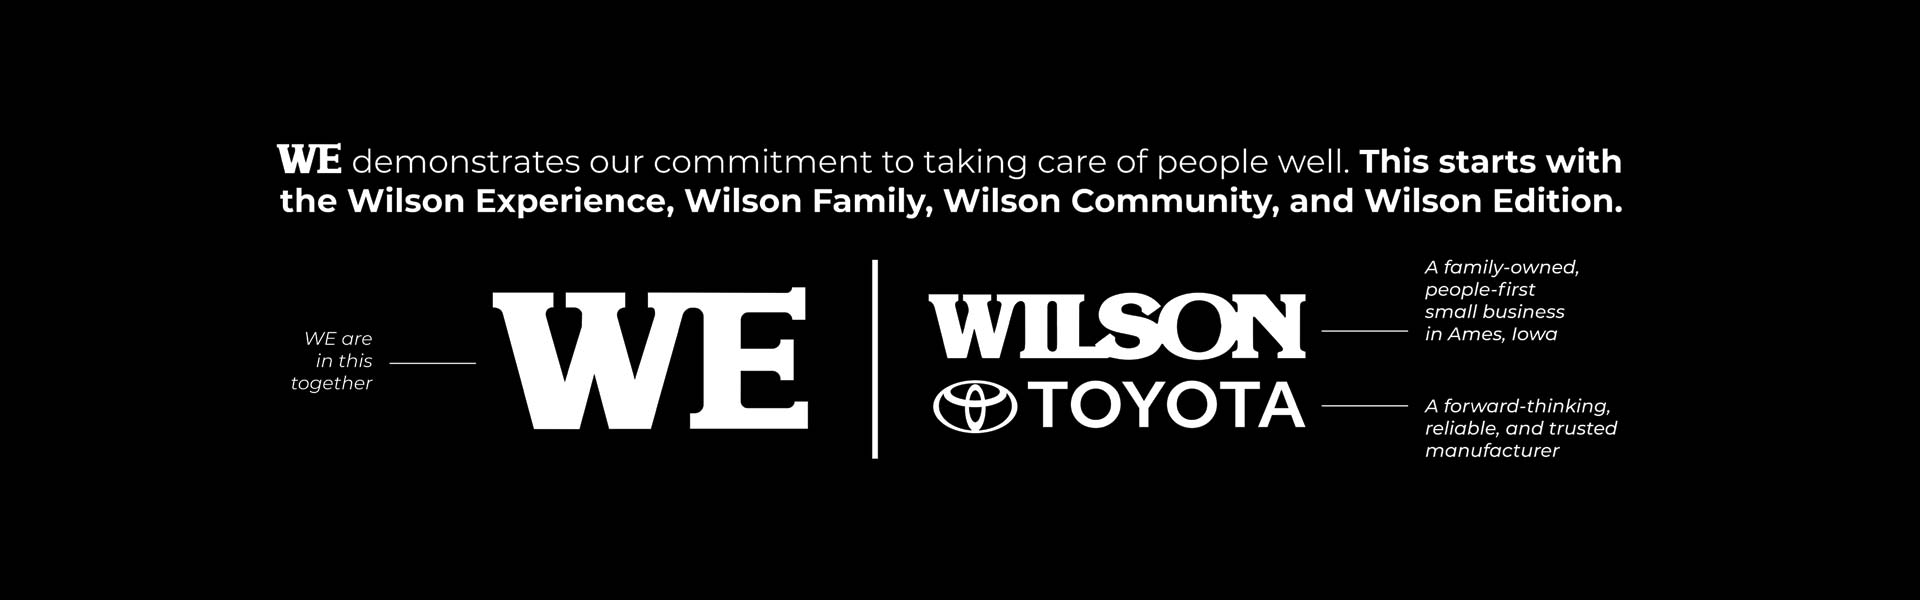 Wilson Toyota of Ames in Ames IA